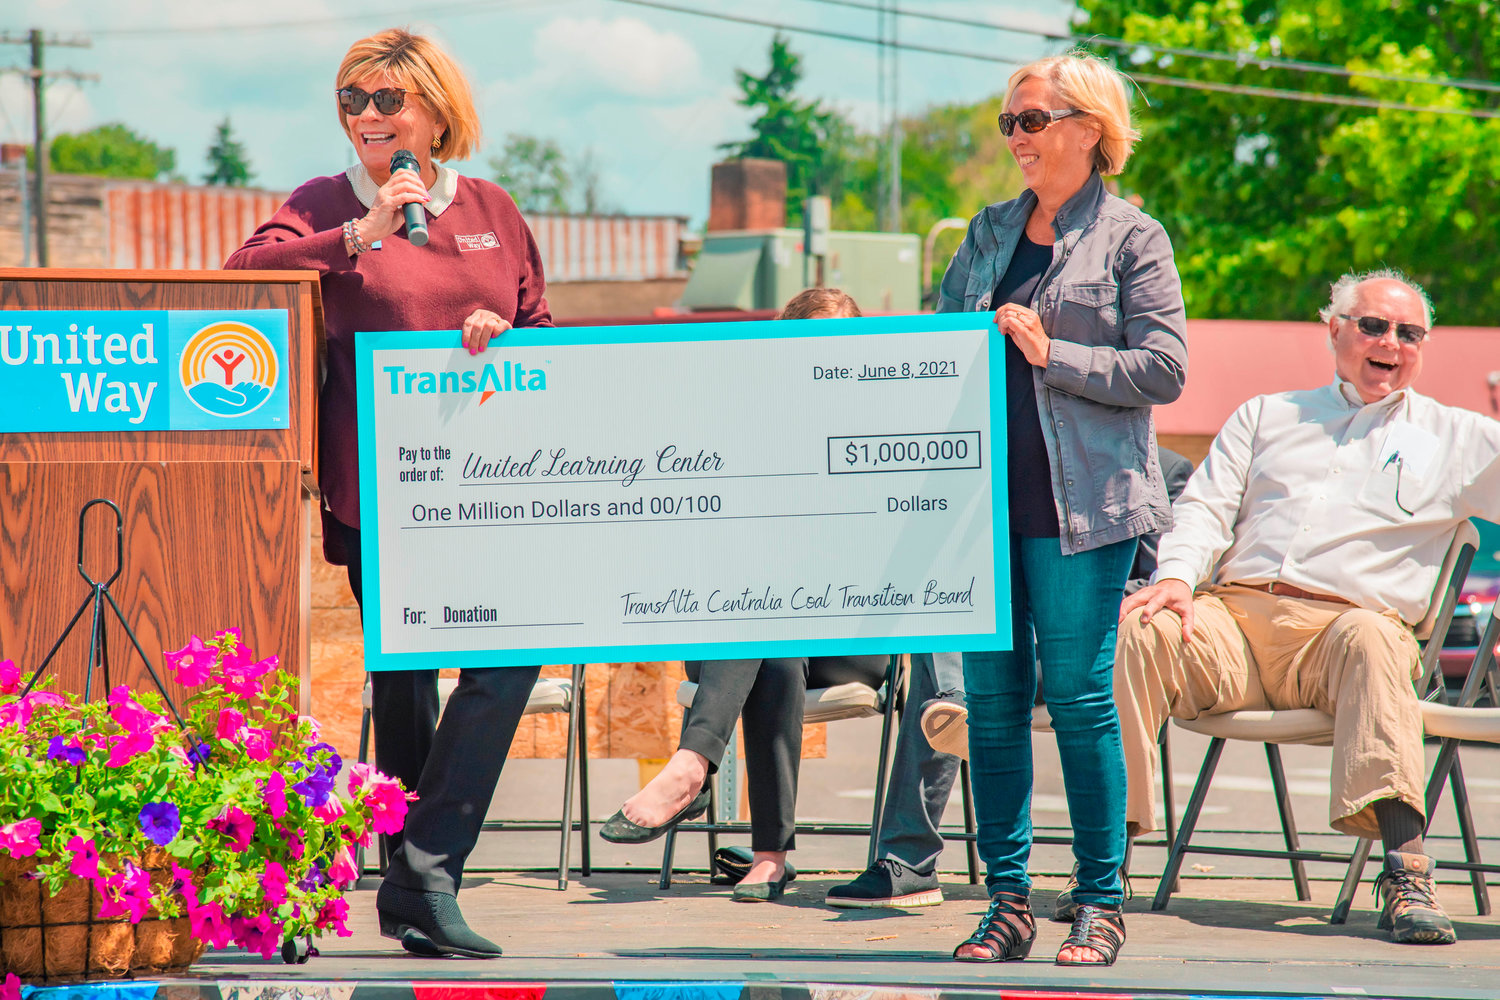 A $1 million grant for the project from the TransAlta Centralia Coal Transition Board was also presented for the first time at the ceremony.